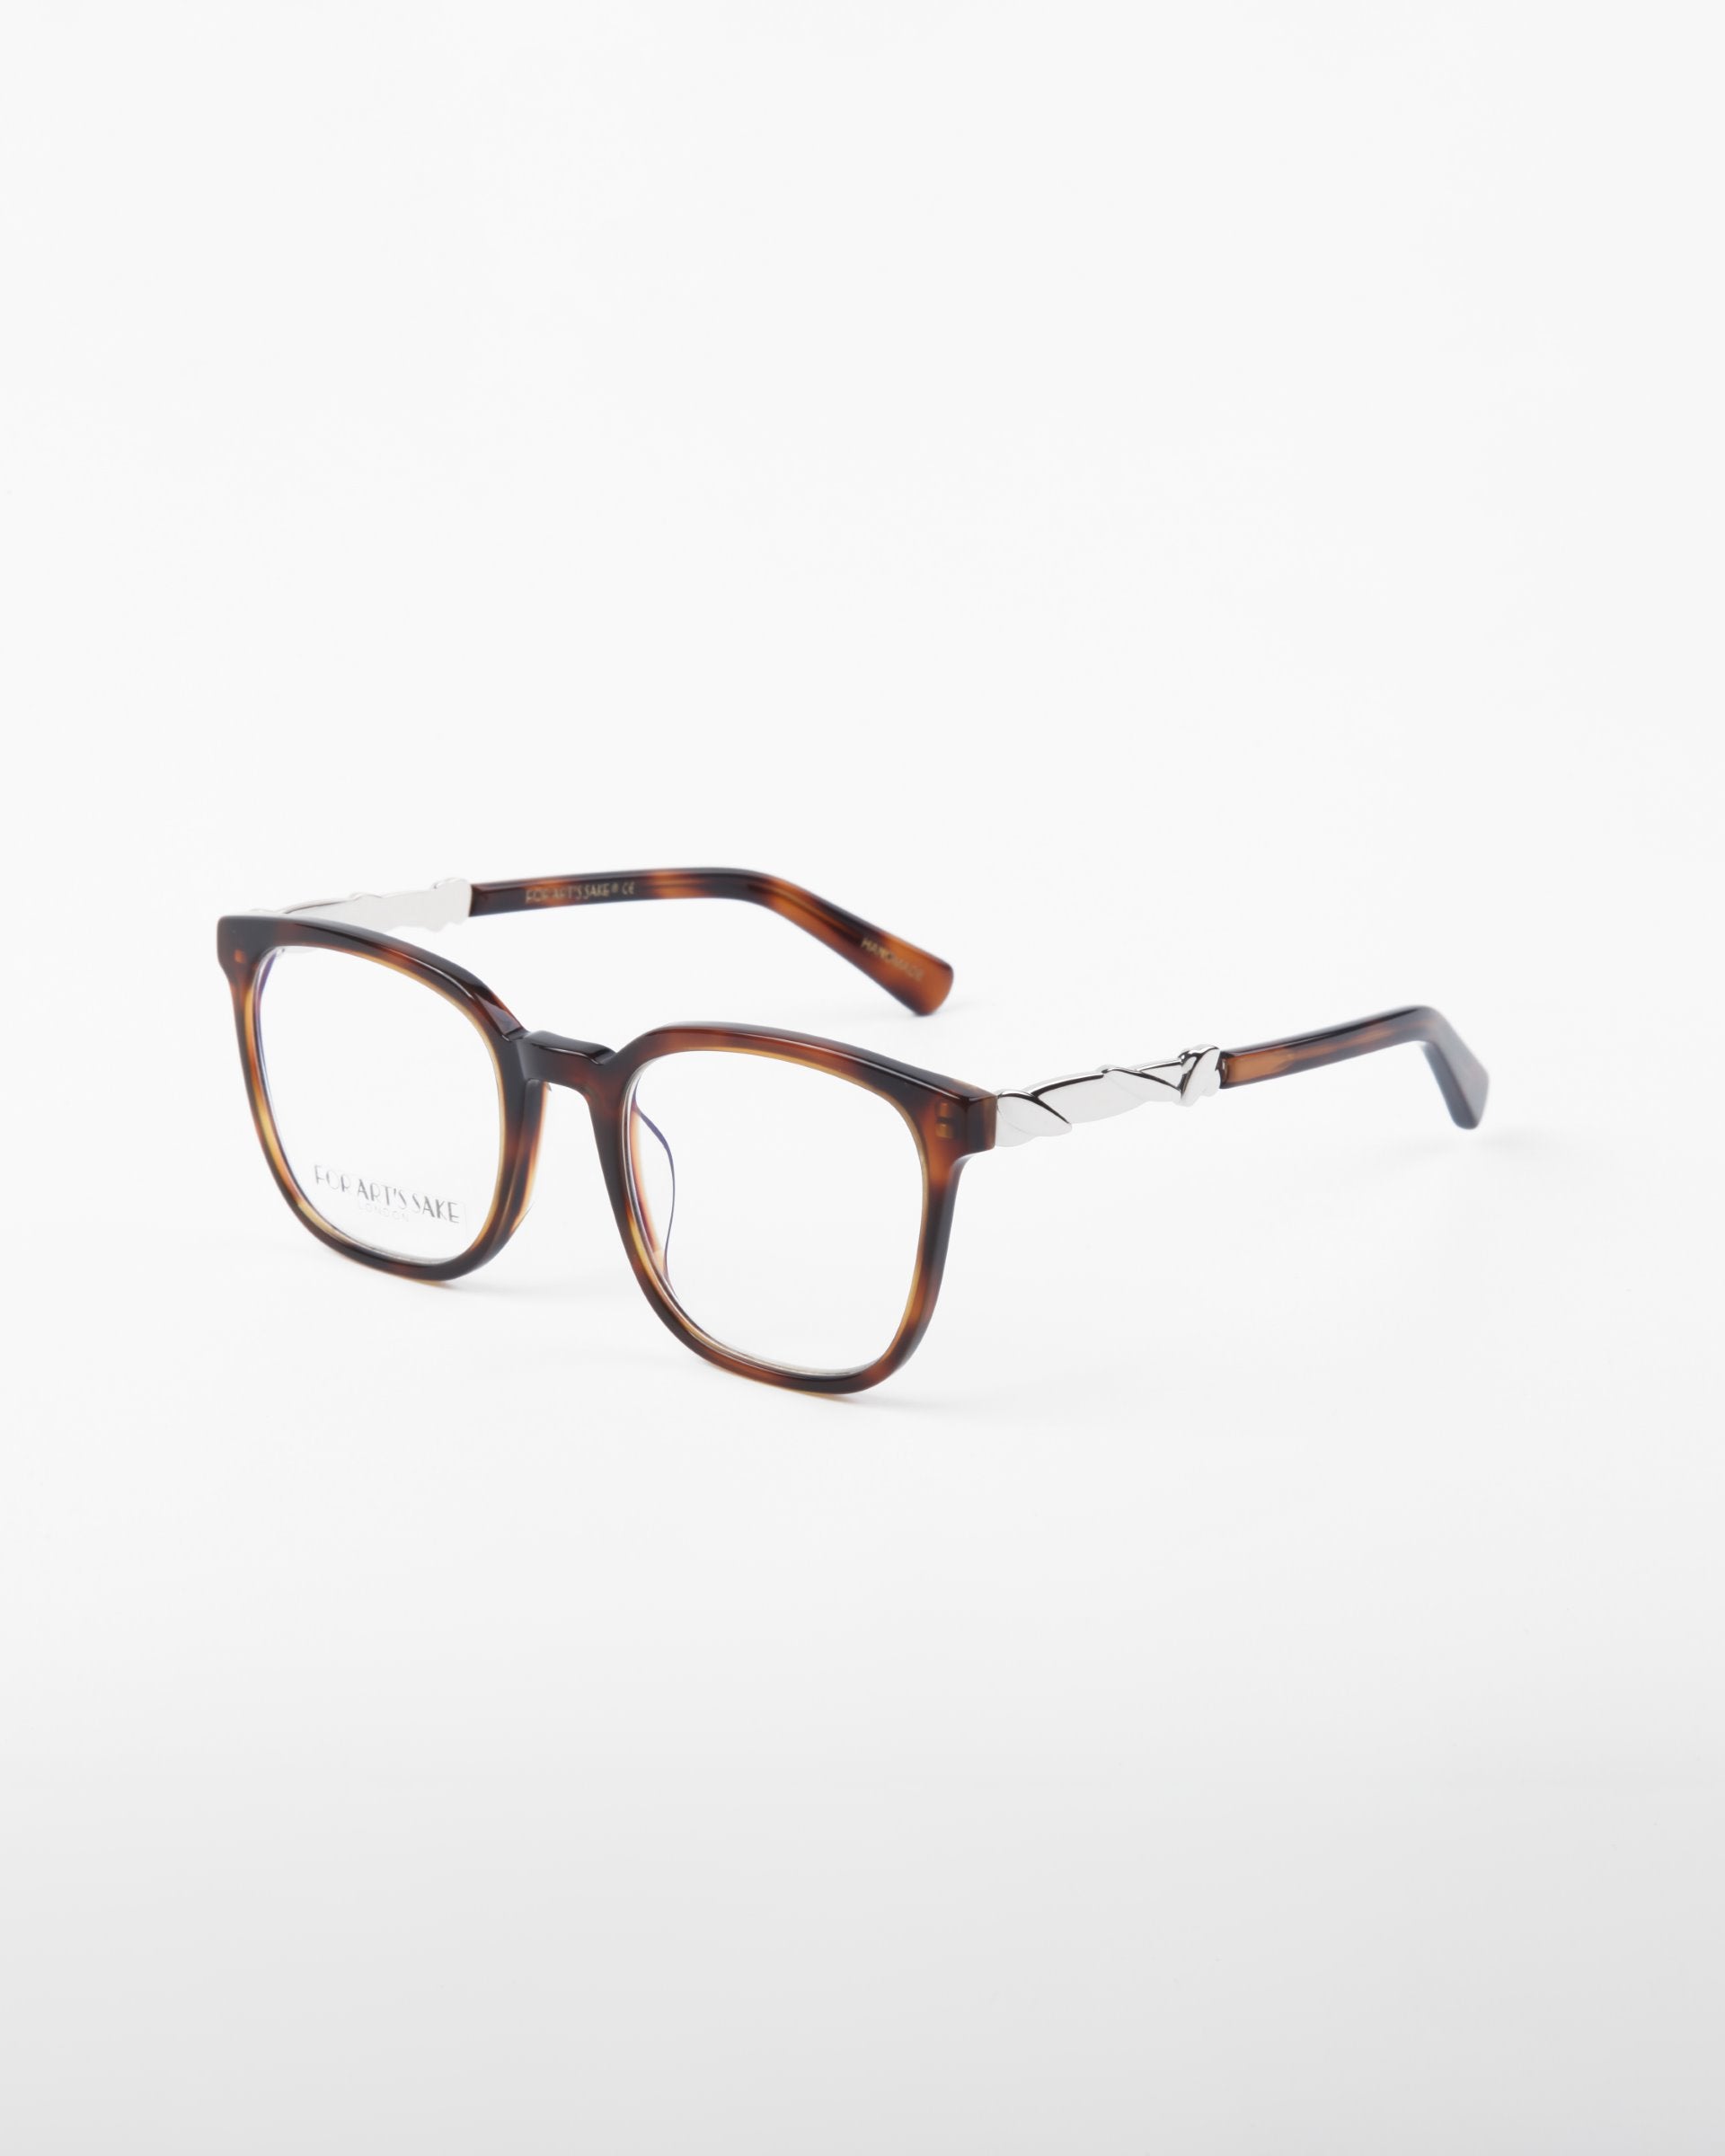 A pair of For Art's Sake® Molten rectangular eyeglasses with tortoiseshell frames made from plant-based acetate and silver metal accents on the temples, set against a plain white background. The lenses are clear, suitable for prescription eyewear or fashion wear, and potentially feature a blue light filter.